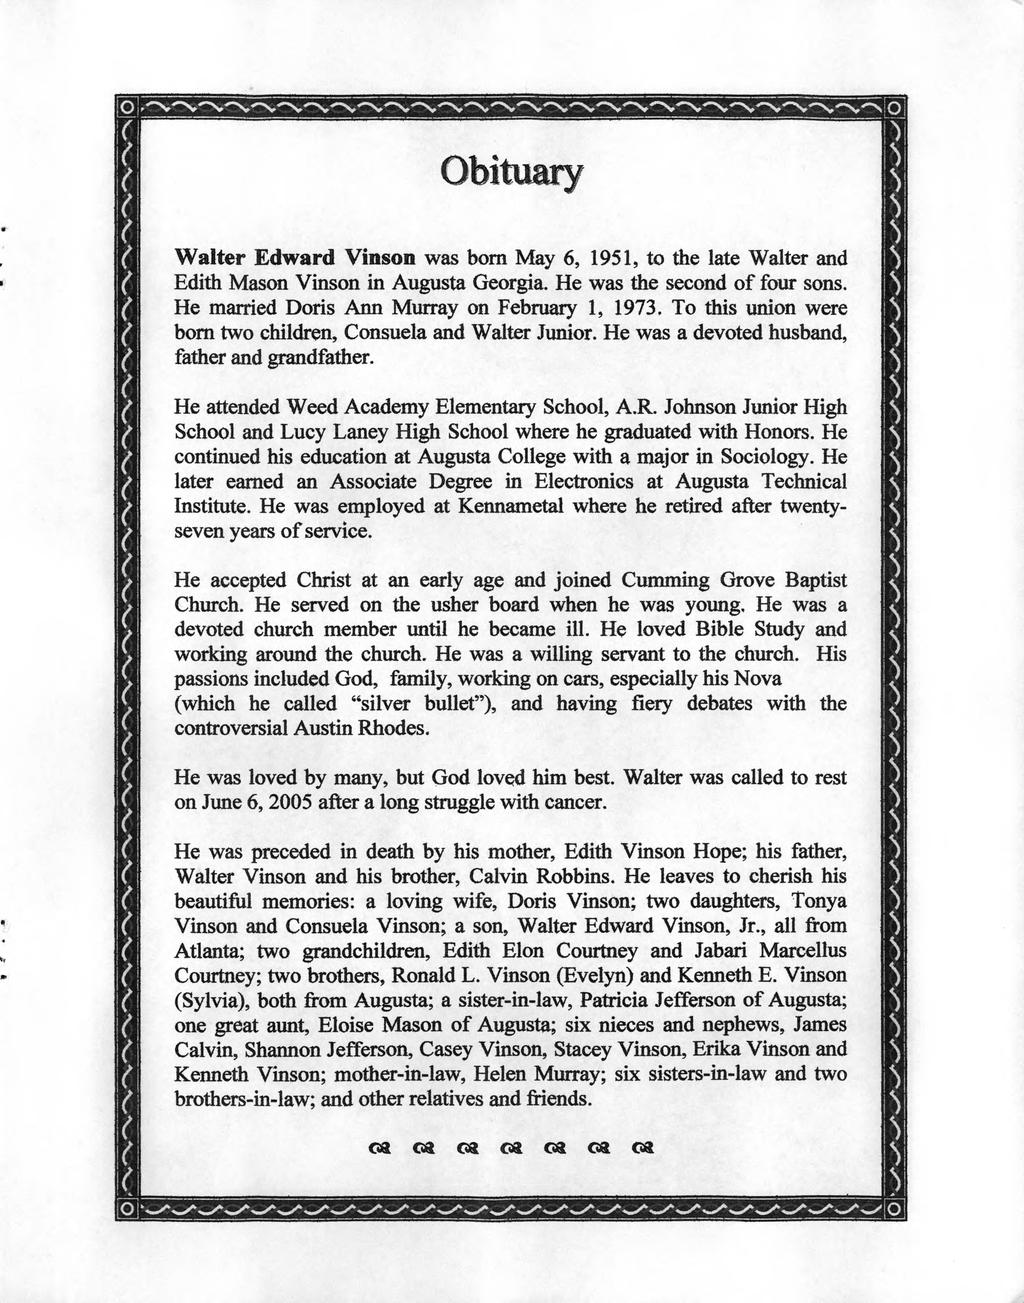 Obituary Walter Edward Vinson was born May 6, 1951, to the late Walter and Edith Mason Vinson in Augusta Georgia. He was the second of four sons. He married Doris Ann Murray on February 1, 1973.